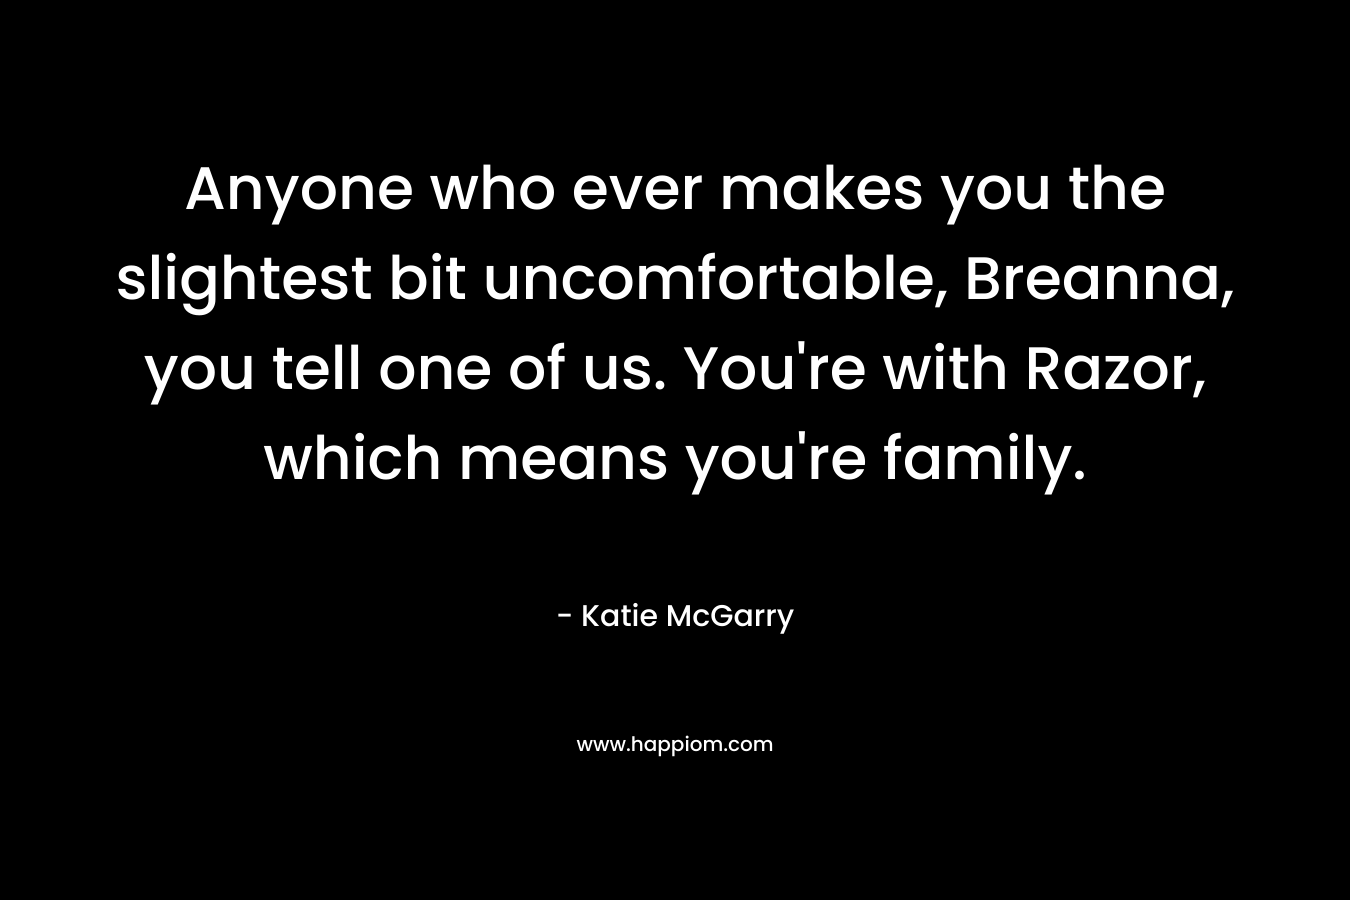 Anyone who ever makes you the slightest bit uncomfortable, Breanna, you tell one of us. You’re with Razor, which means you’re family. – Katie McGarry